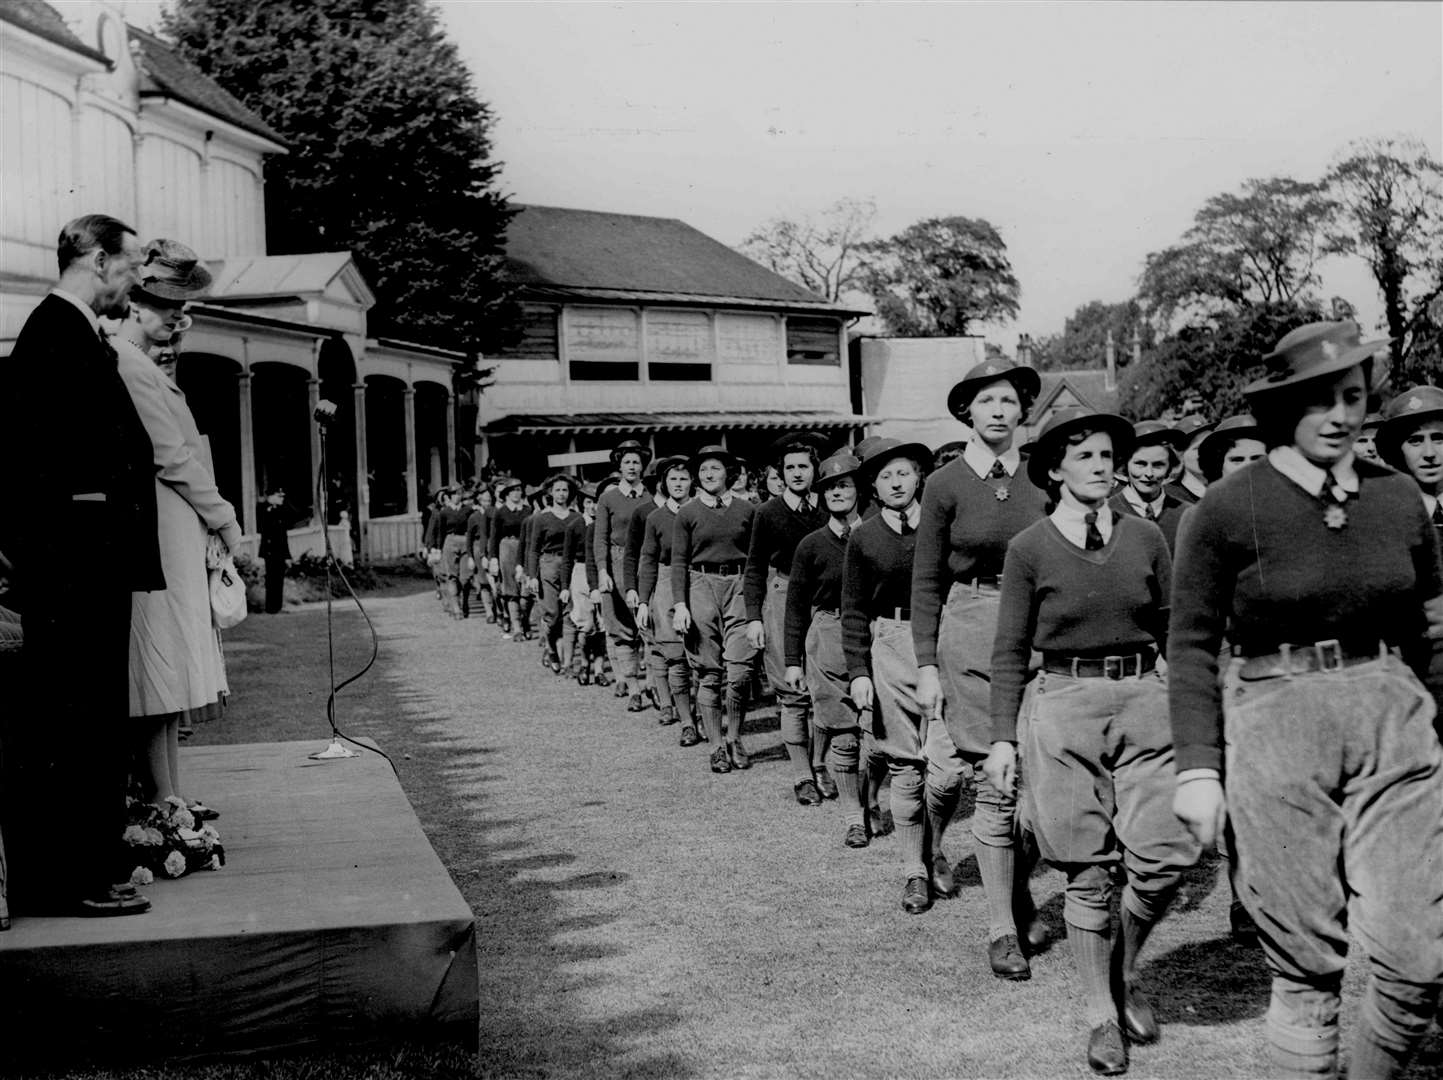 The Duchess of Kent thanks 1,700 Kent Land Girls at a march past and presentation at the St Lawrence Cricket Ground June 29, 1945 in celebration of victory in the Second World War